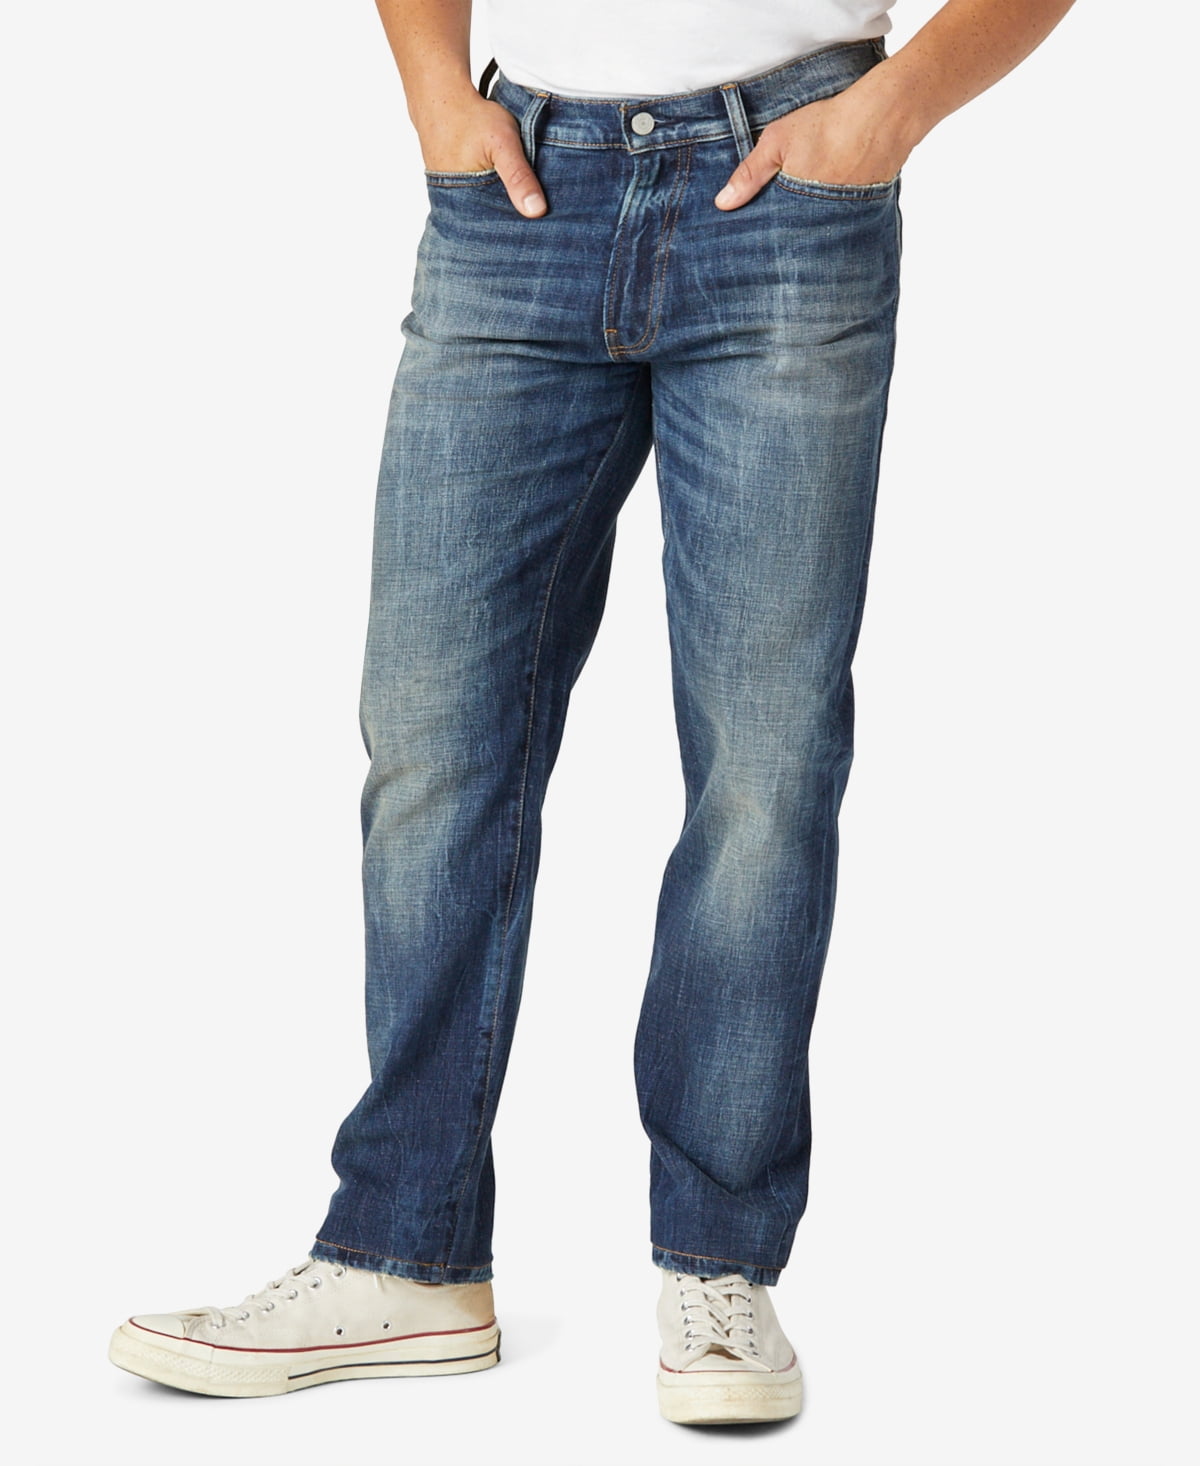 Lucky Brand Men's 410 Athletic Fit Jean, Cortez Madera, 29W X 30L at   Men's Clothing store